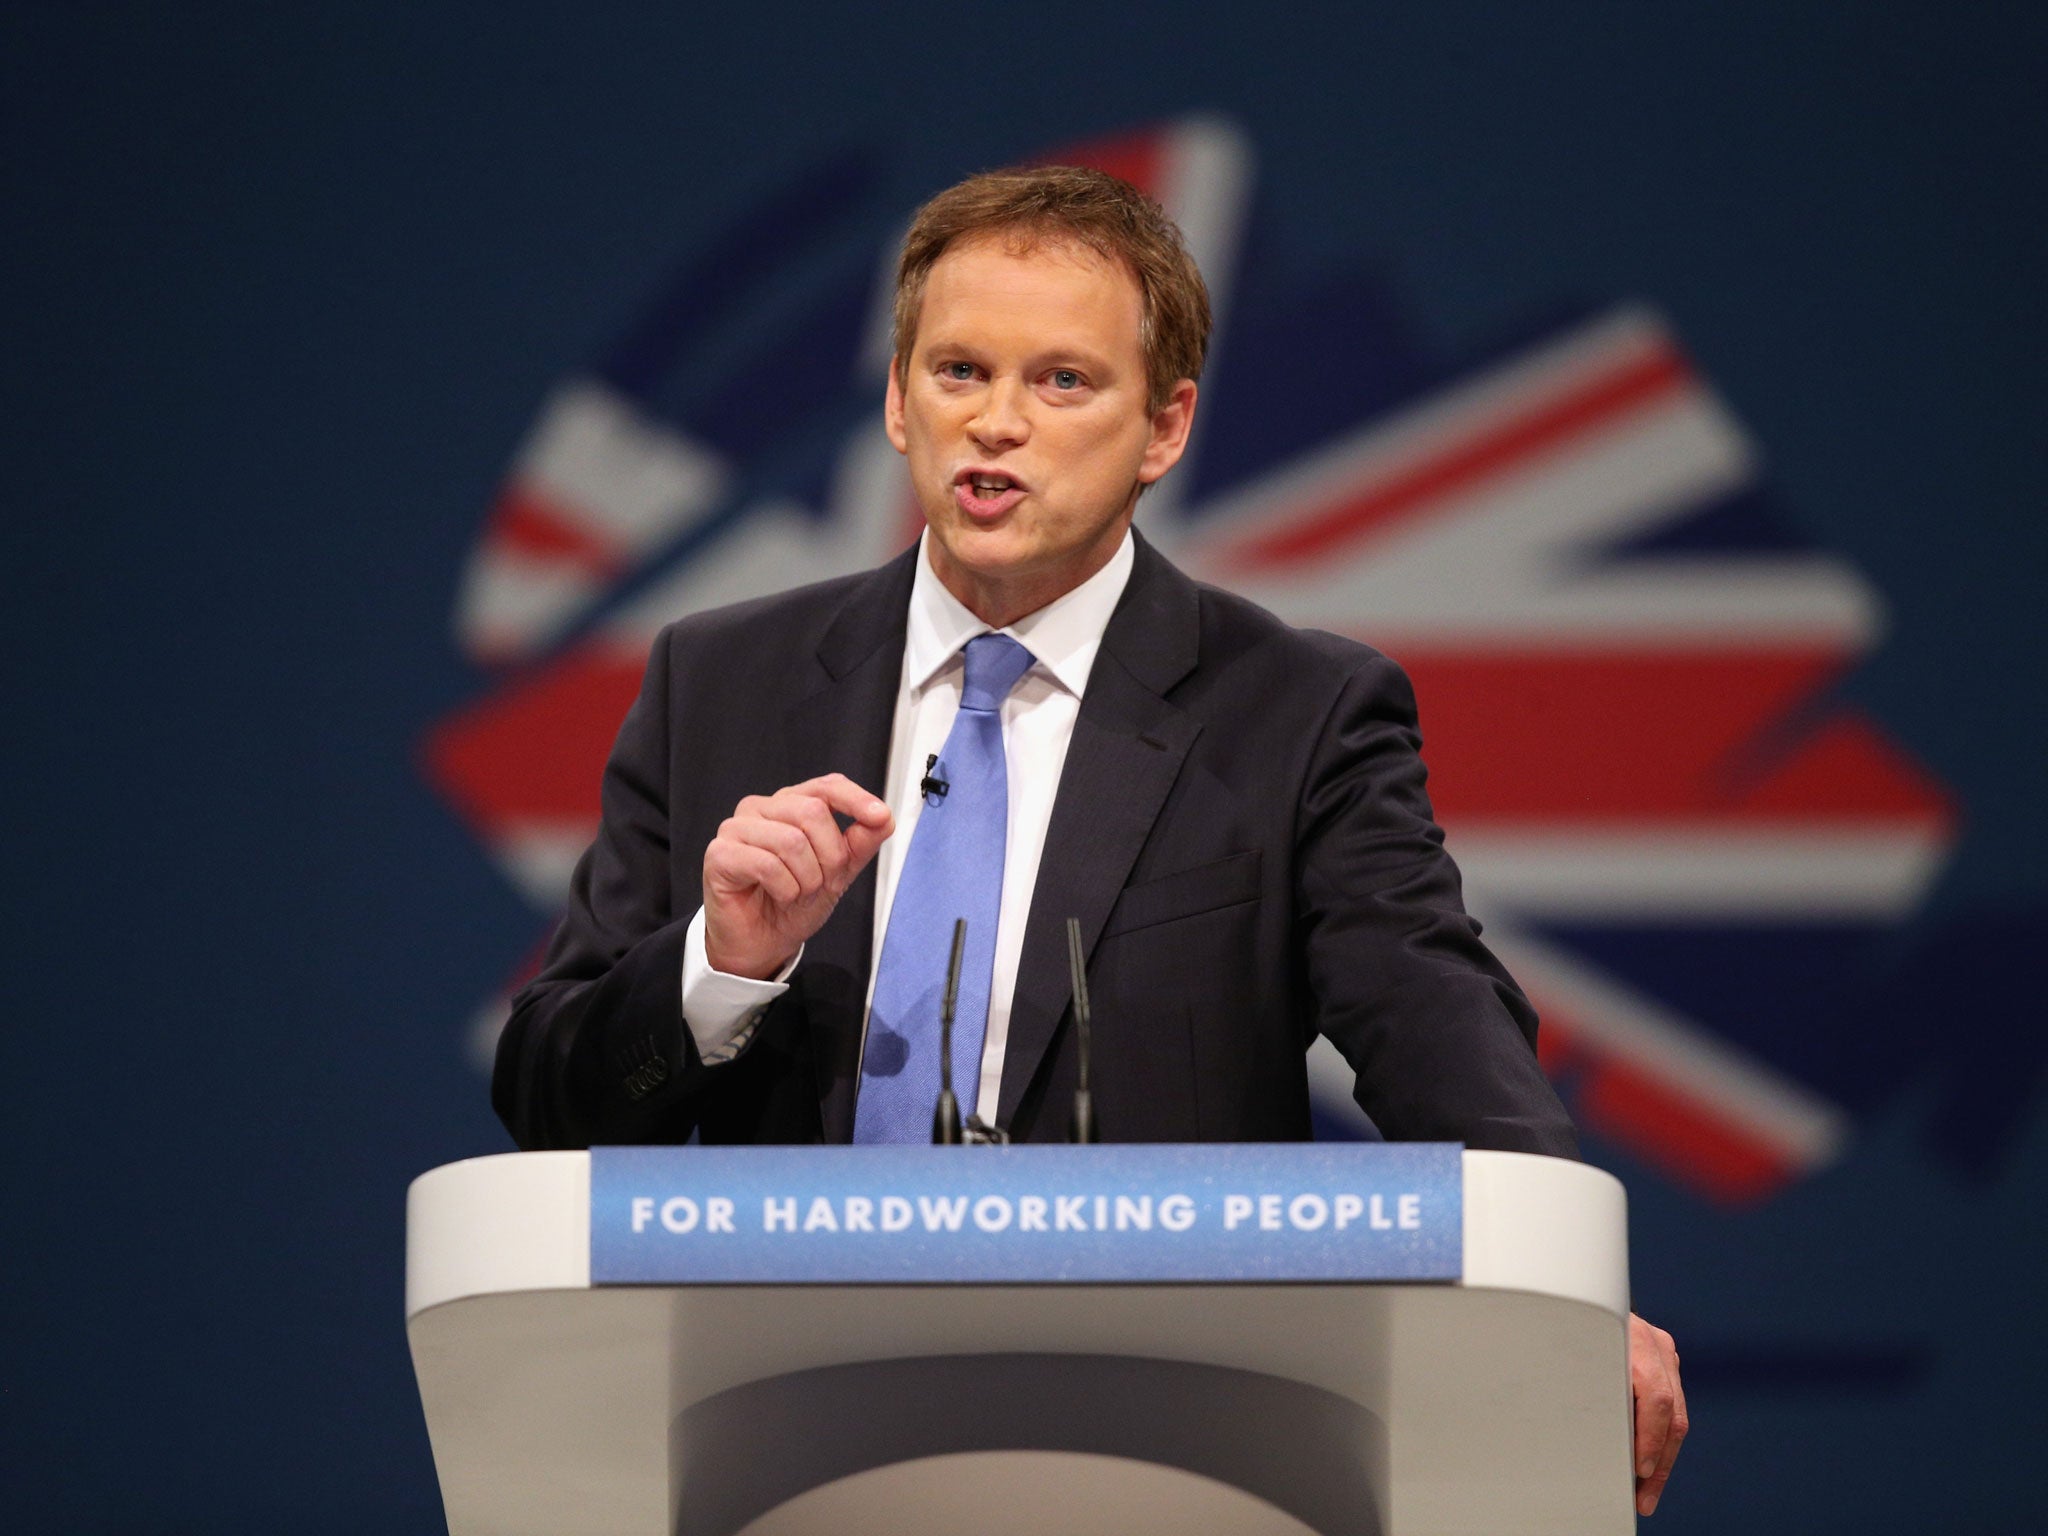 Conservative party Co-Chairman Grant Shapps delivers his speech in the main hall on the first day of the Conservative Party Conference